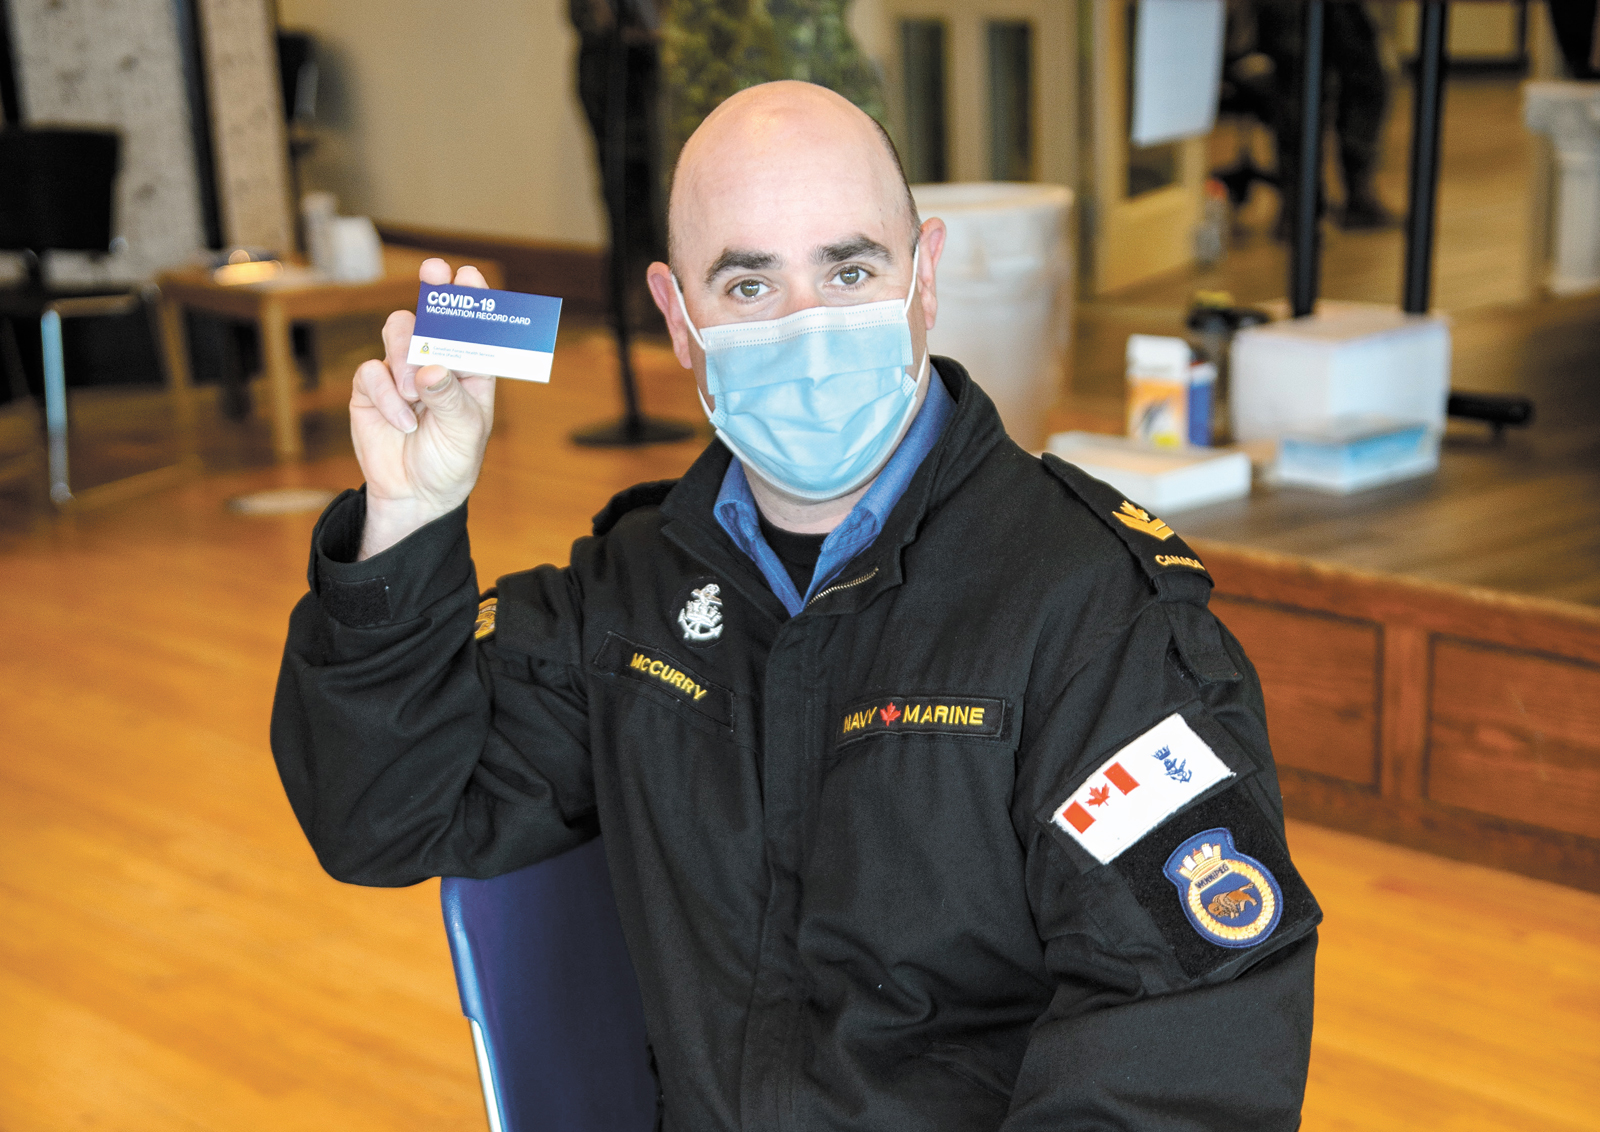 Master Sailor Jamie McCurry holds up his military vaccine card after receiving his shot. Photo by Sailor First Class Mike Goluboff, Imagery Technician